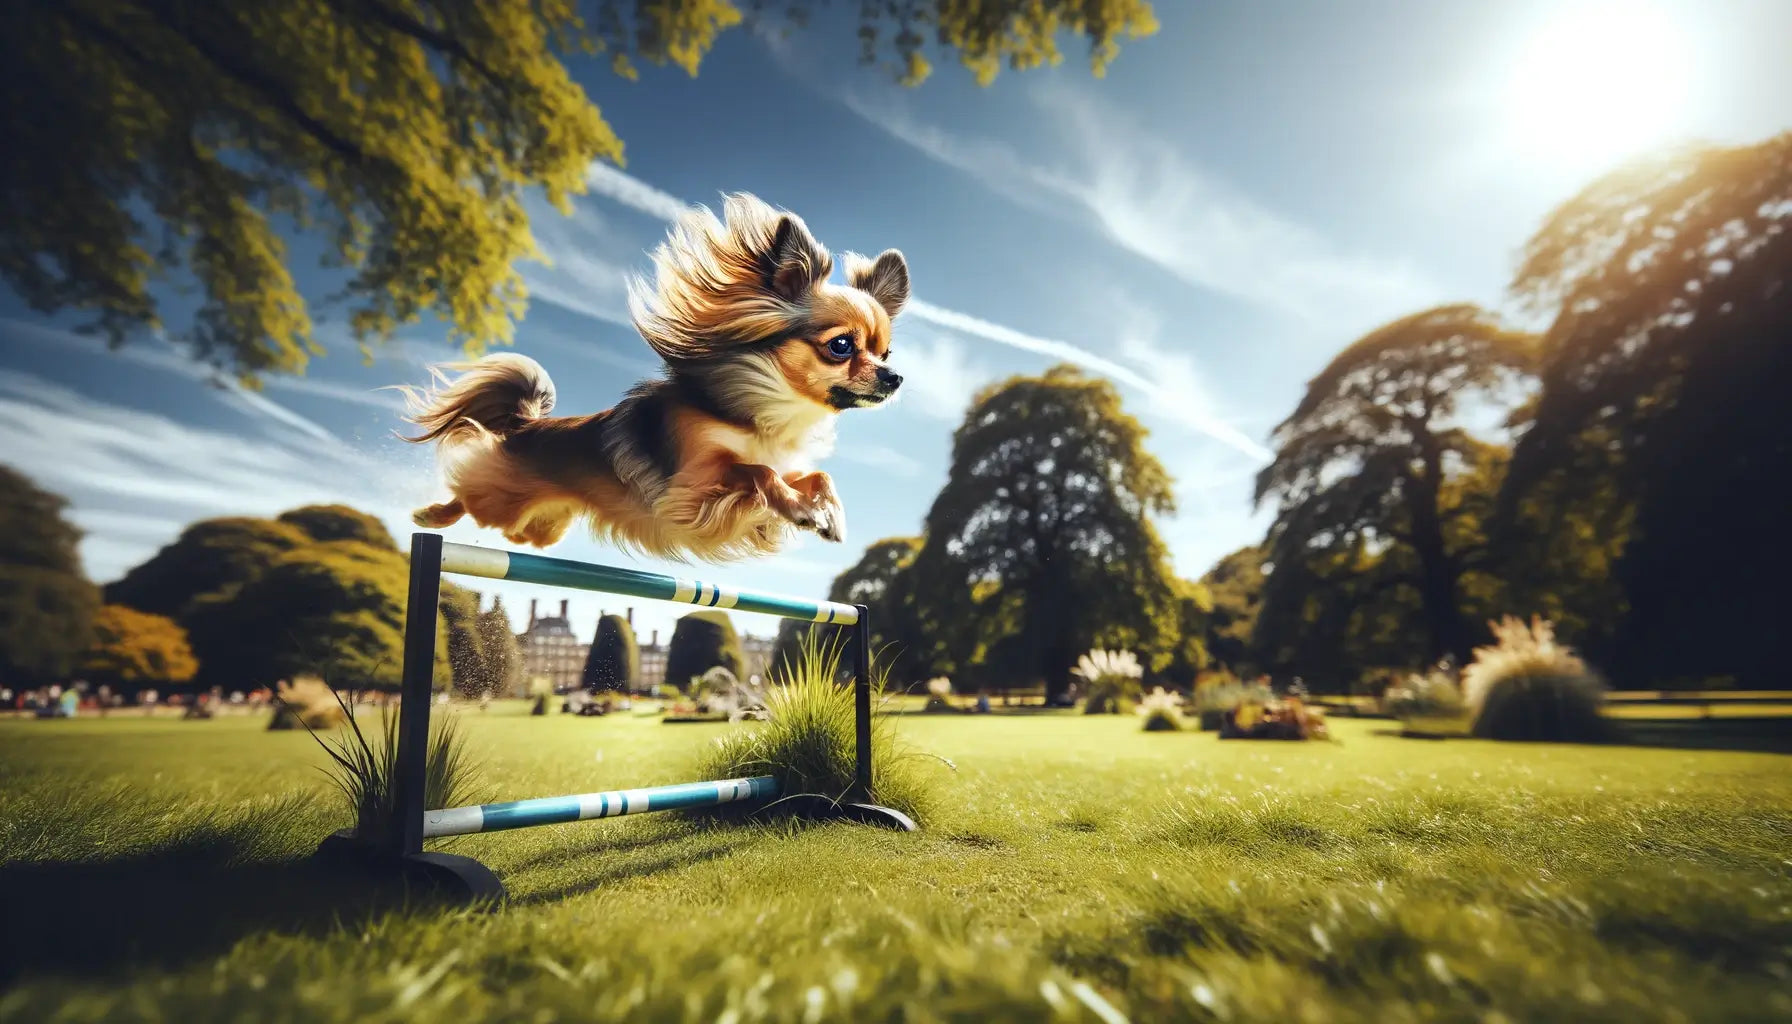 Long-Haired Chihuahua leaping over a small hurdle in a park.